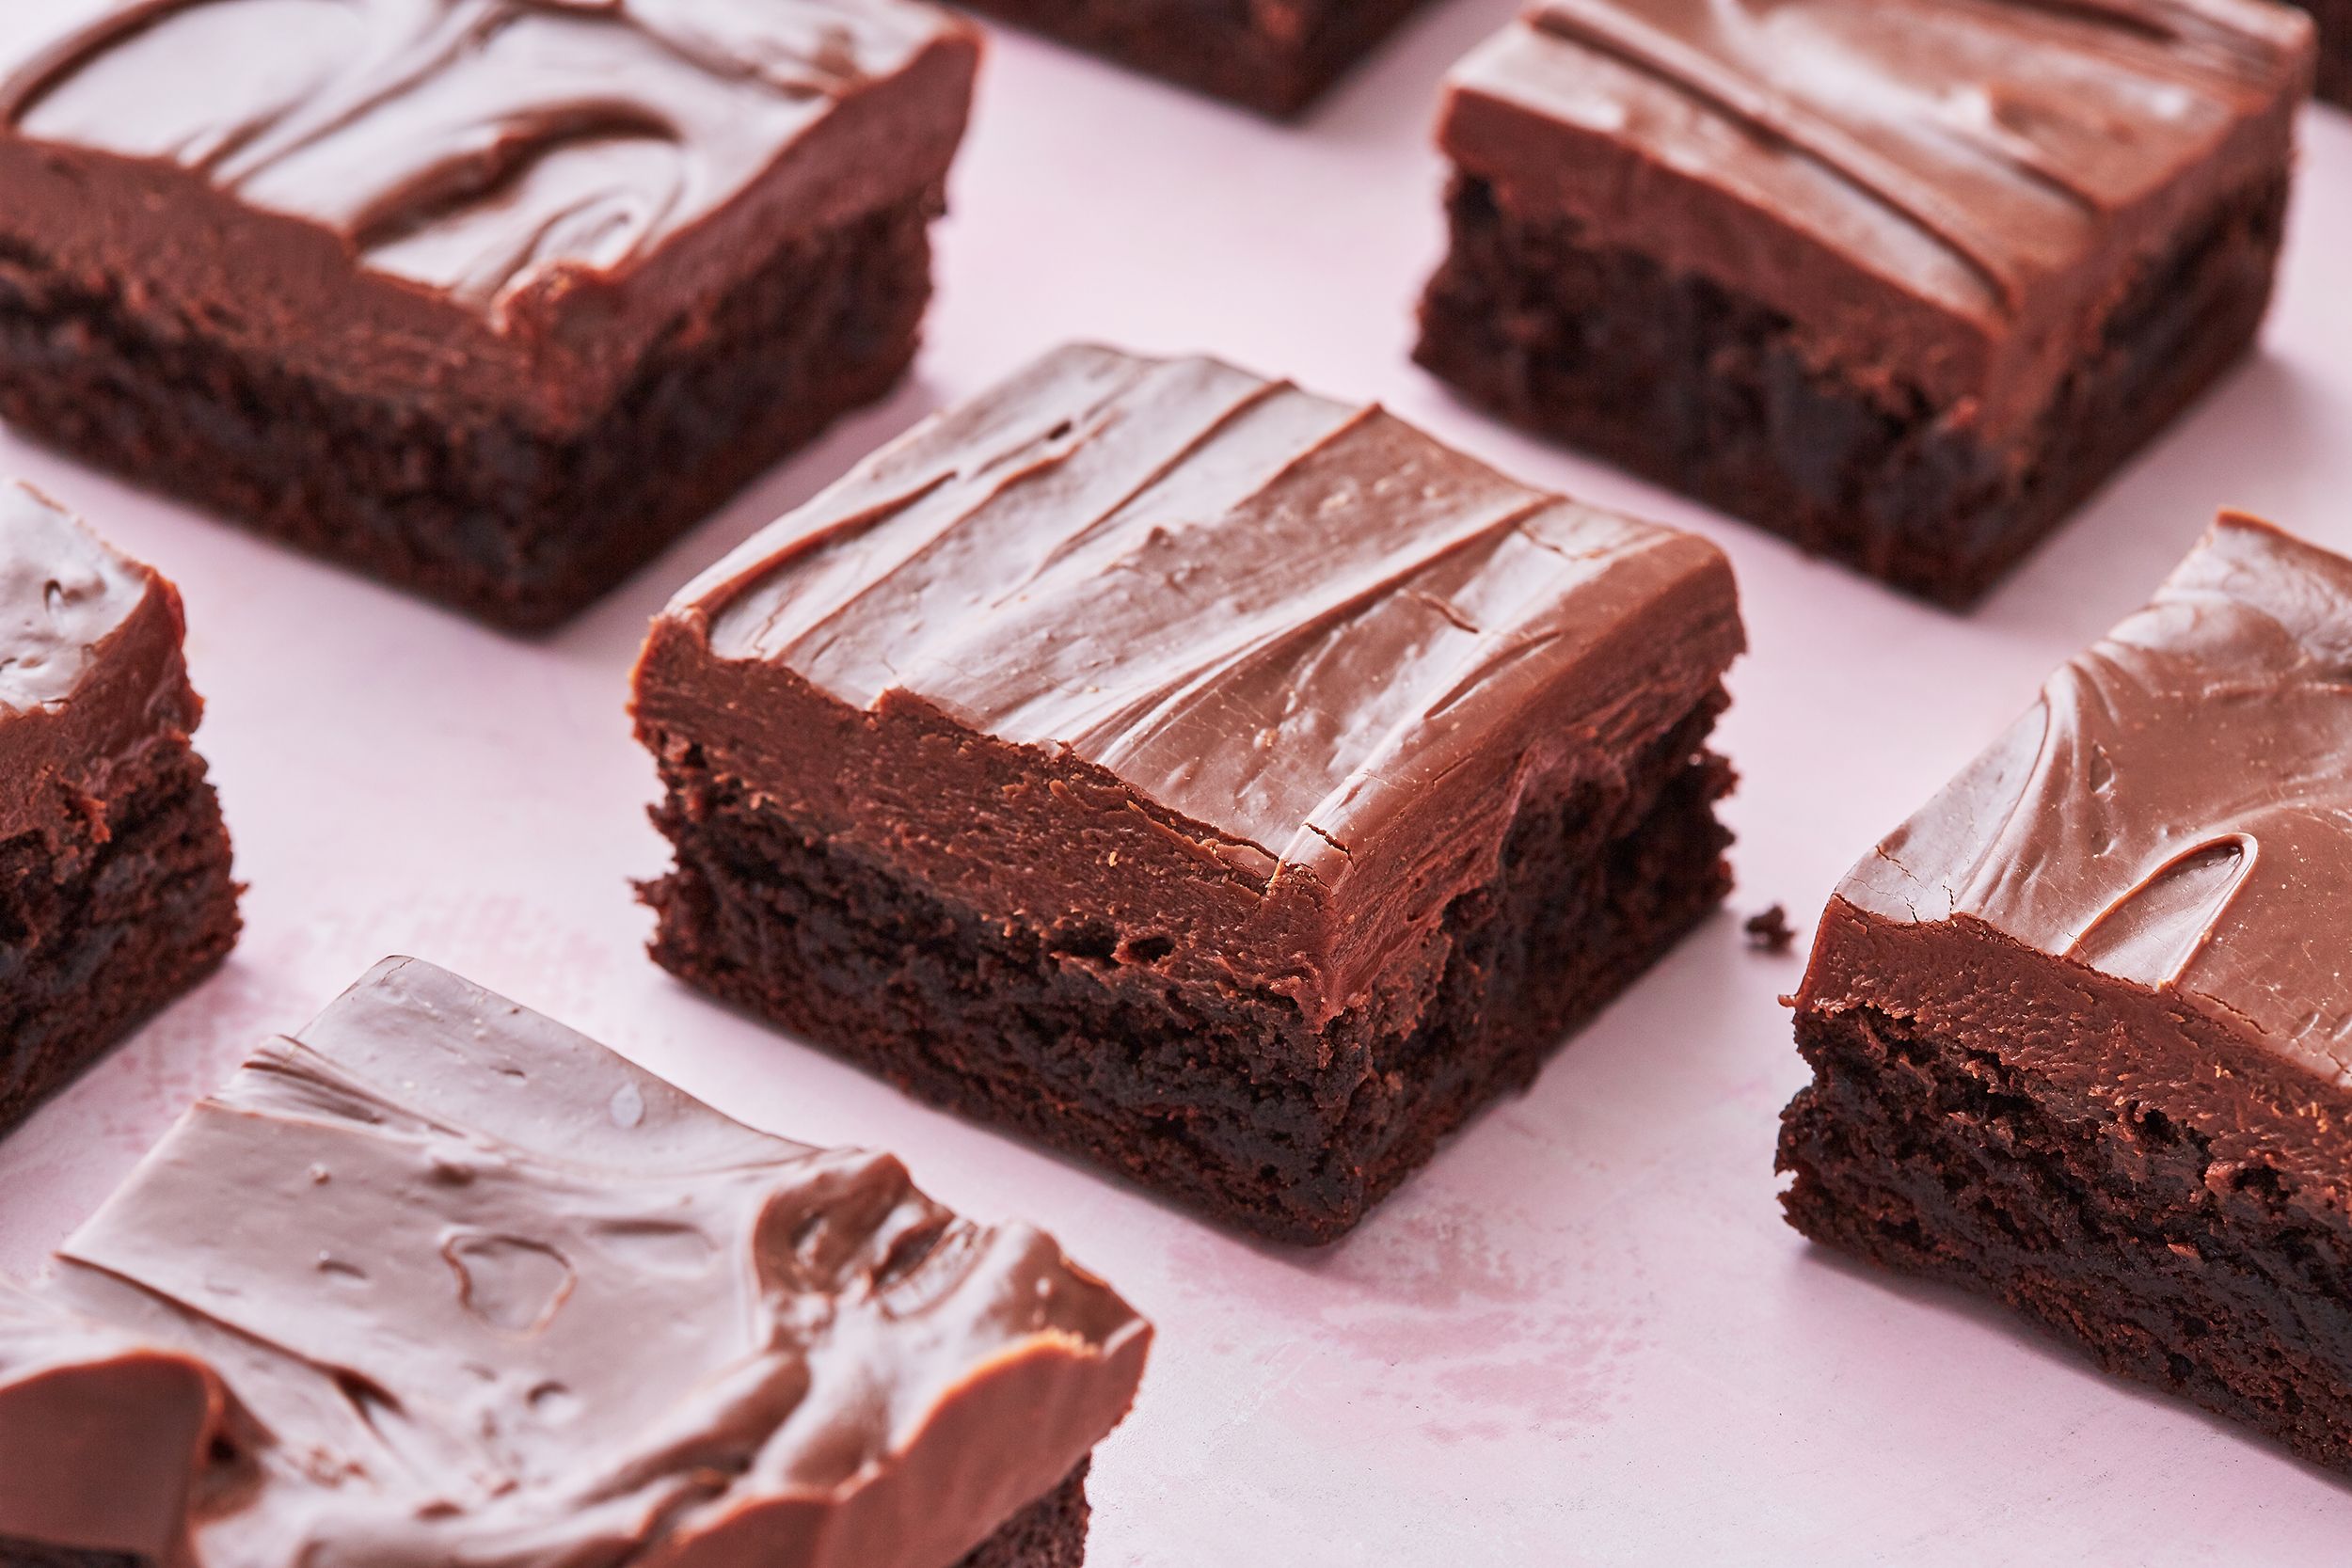 This Is How Temperature, Butter, And Sugar Affect Your Brownies